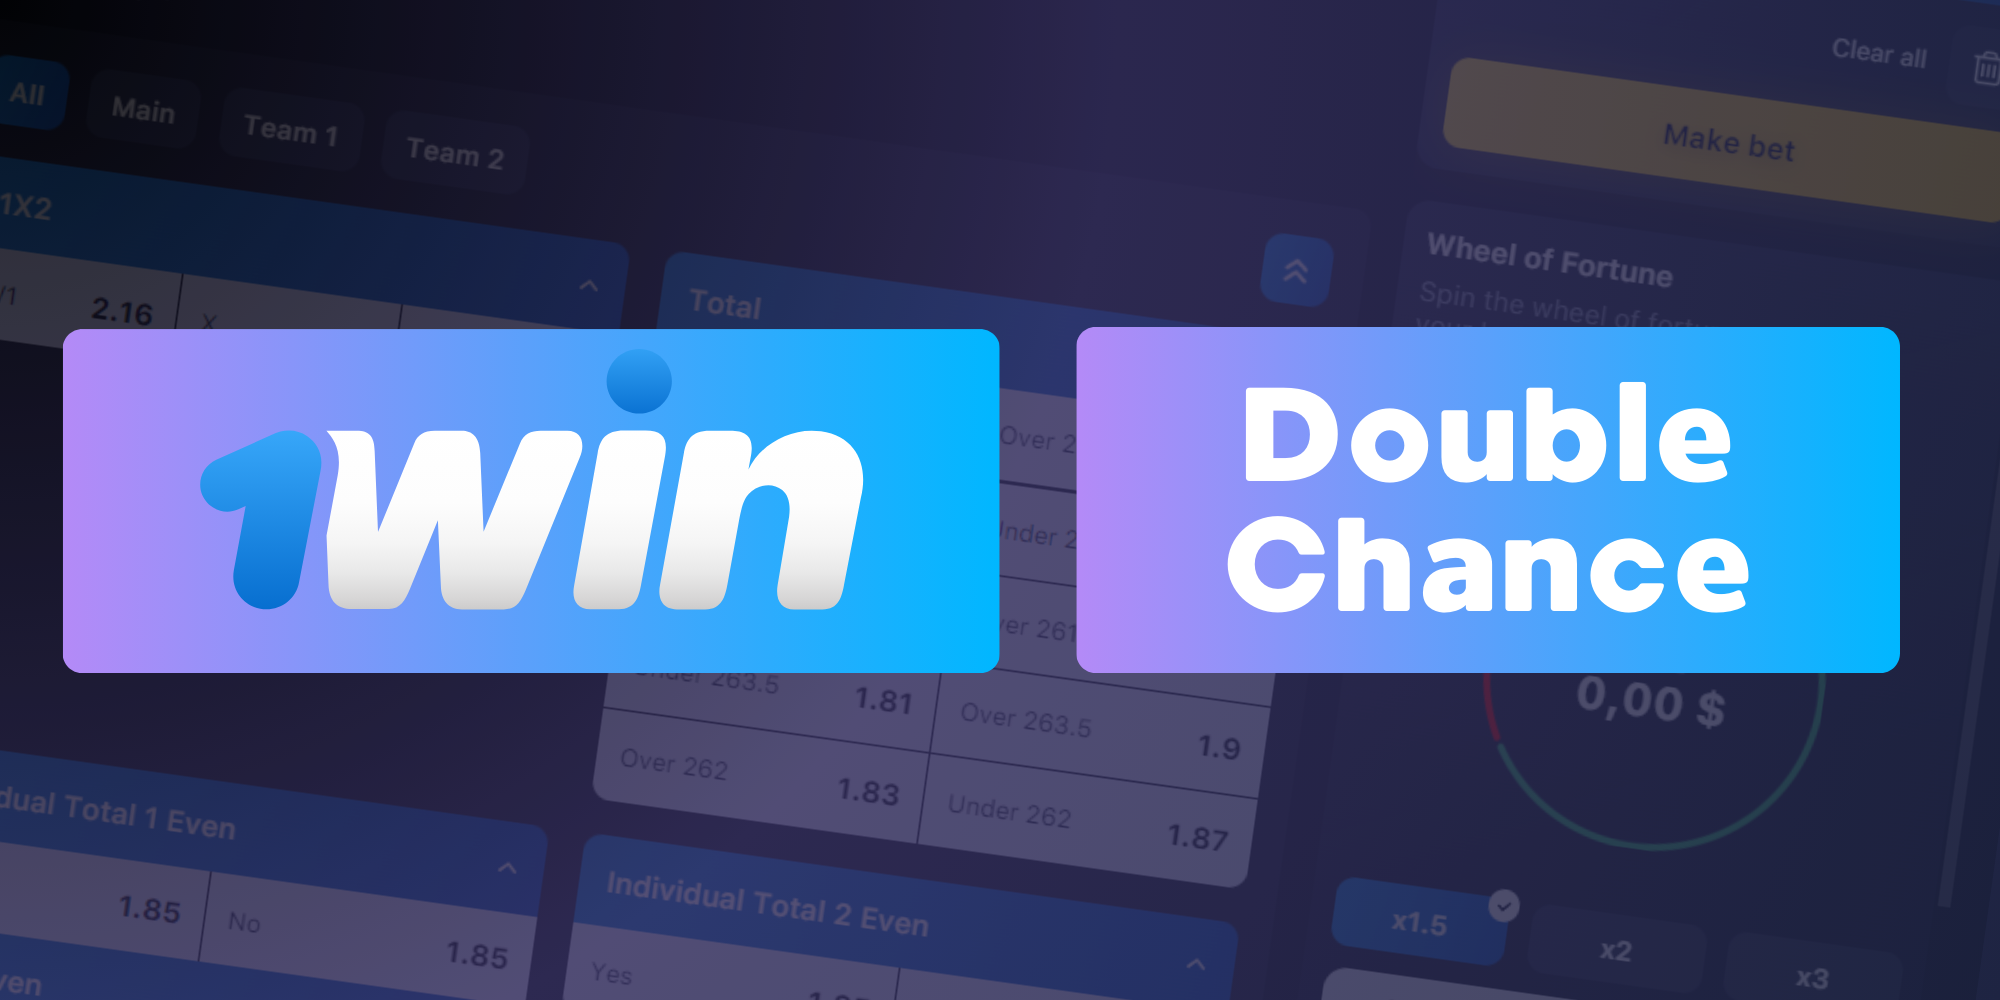 Using Double Chance, players can place bets on two possible outcomes of a match at the same time